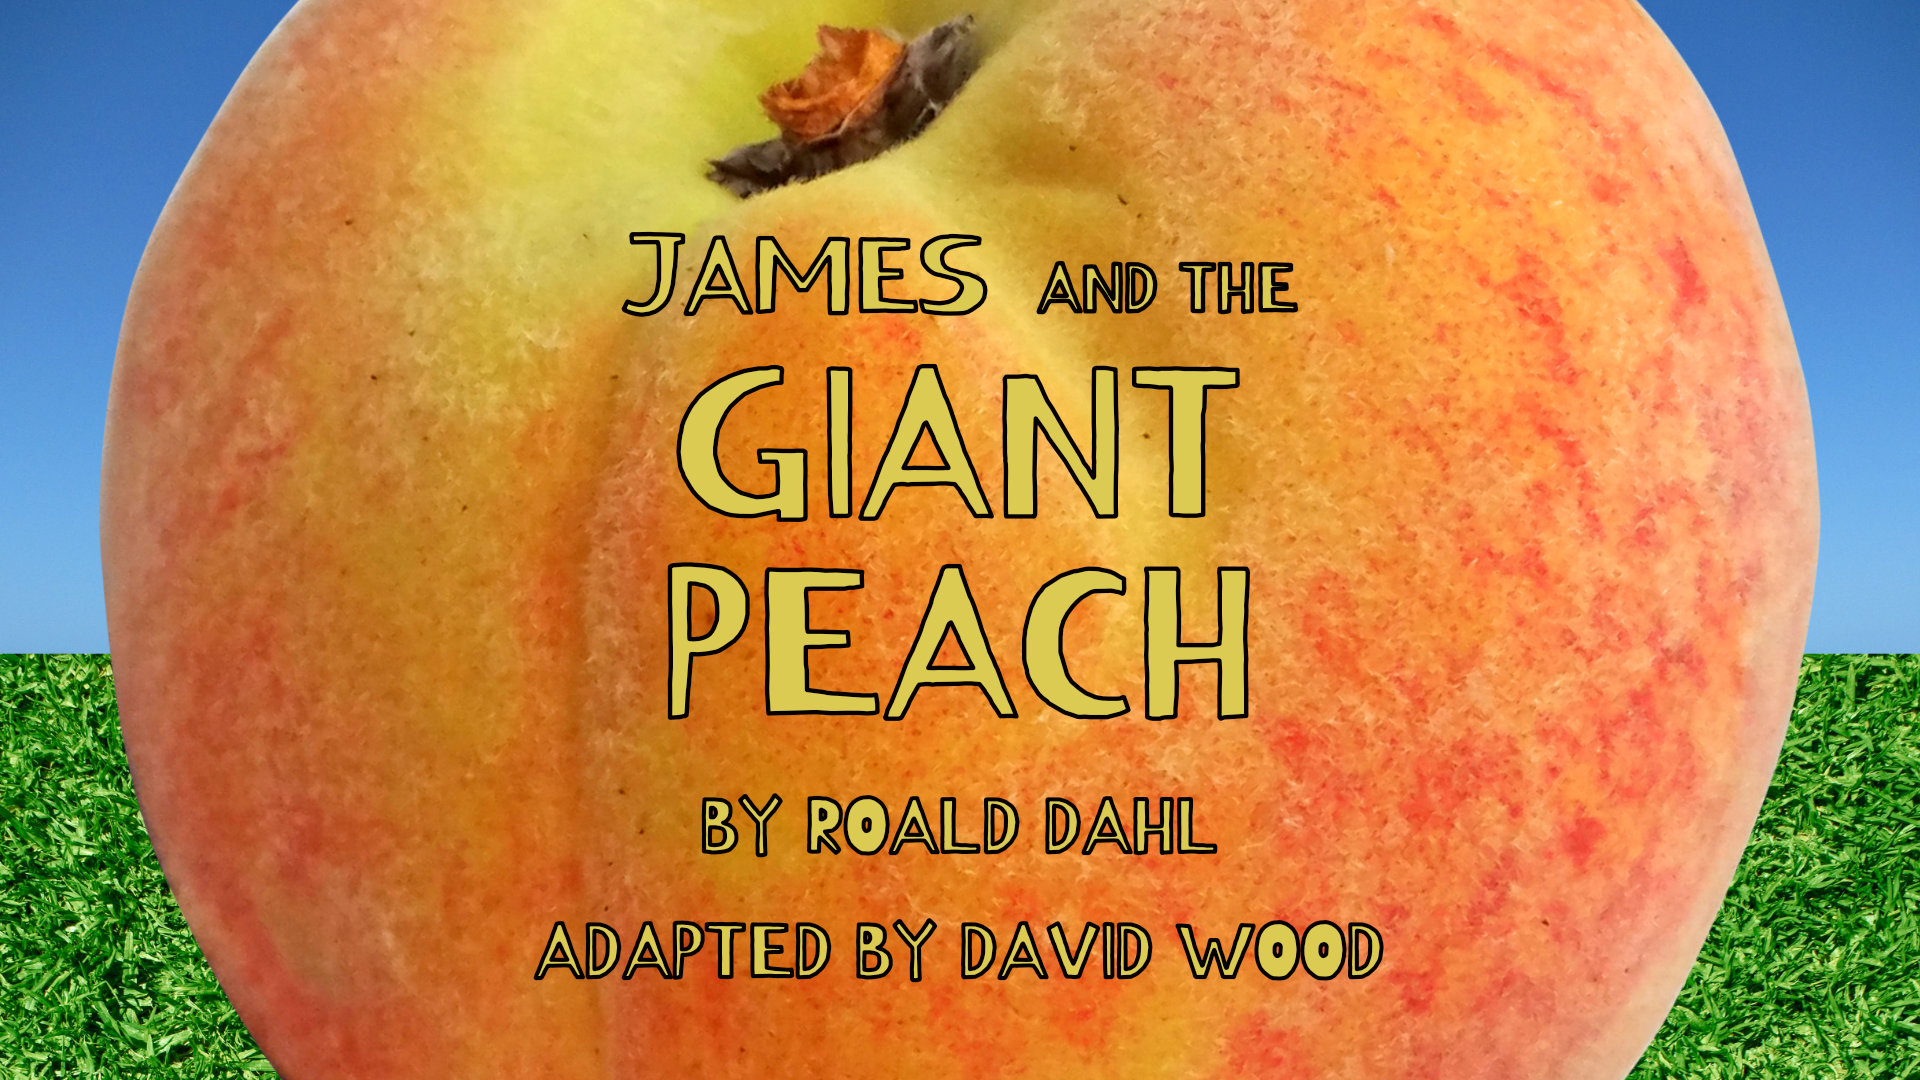 james-and-the-giant-peach-16x9-websitejpg